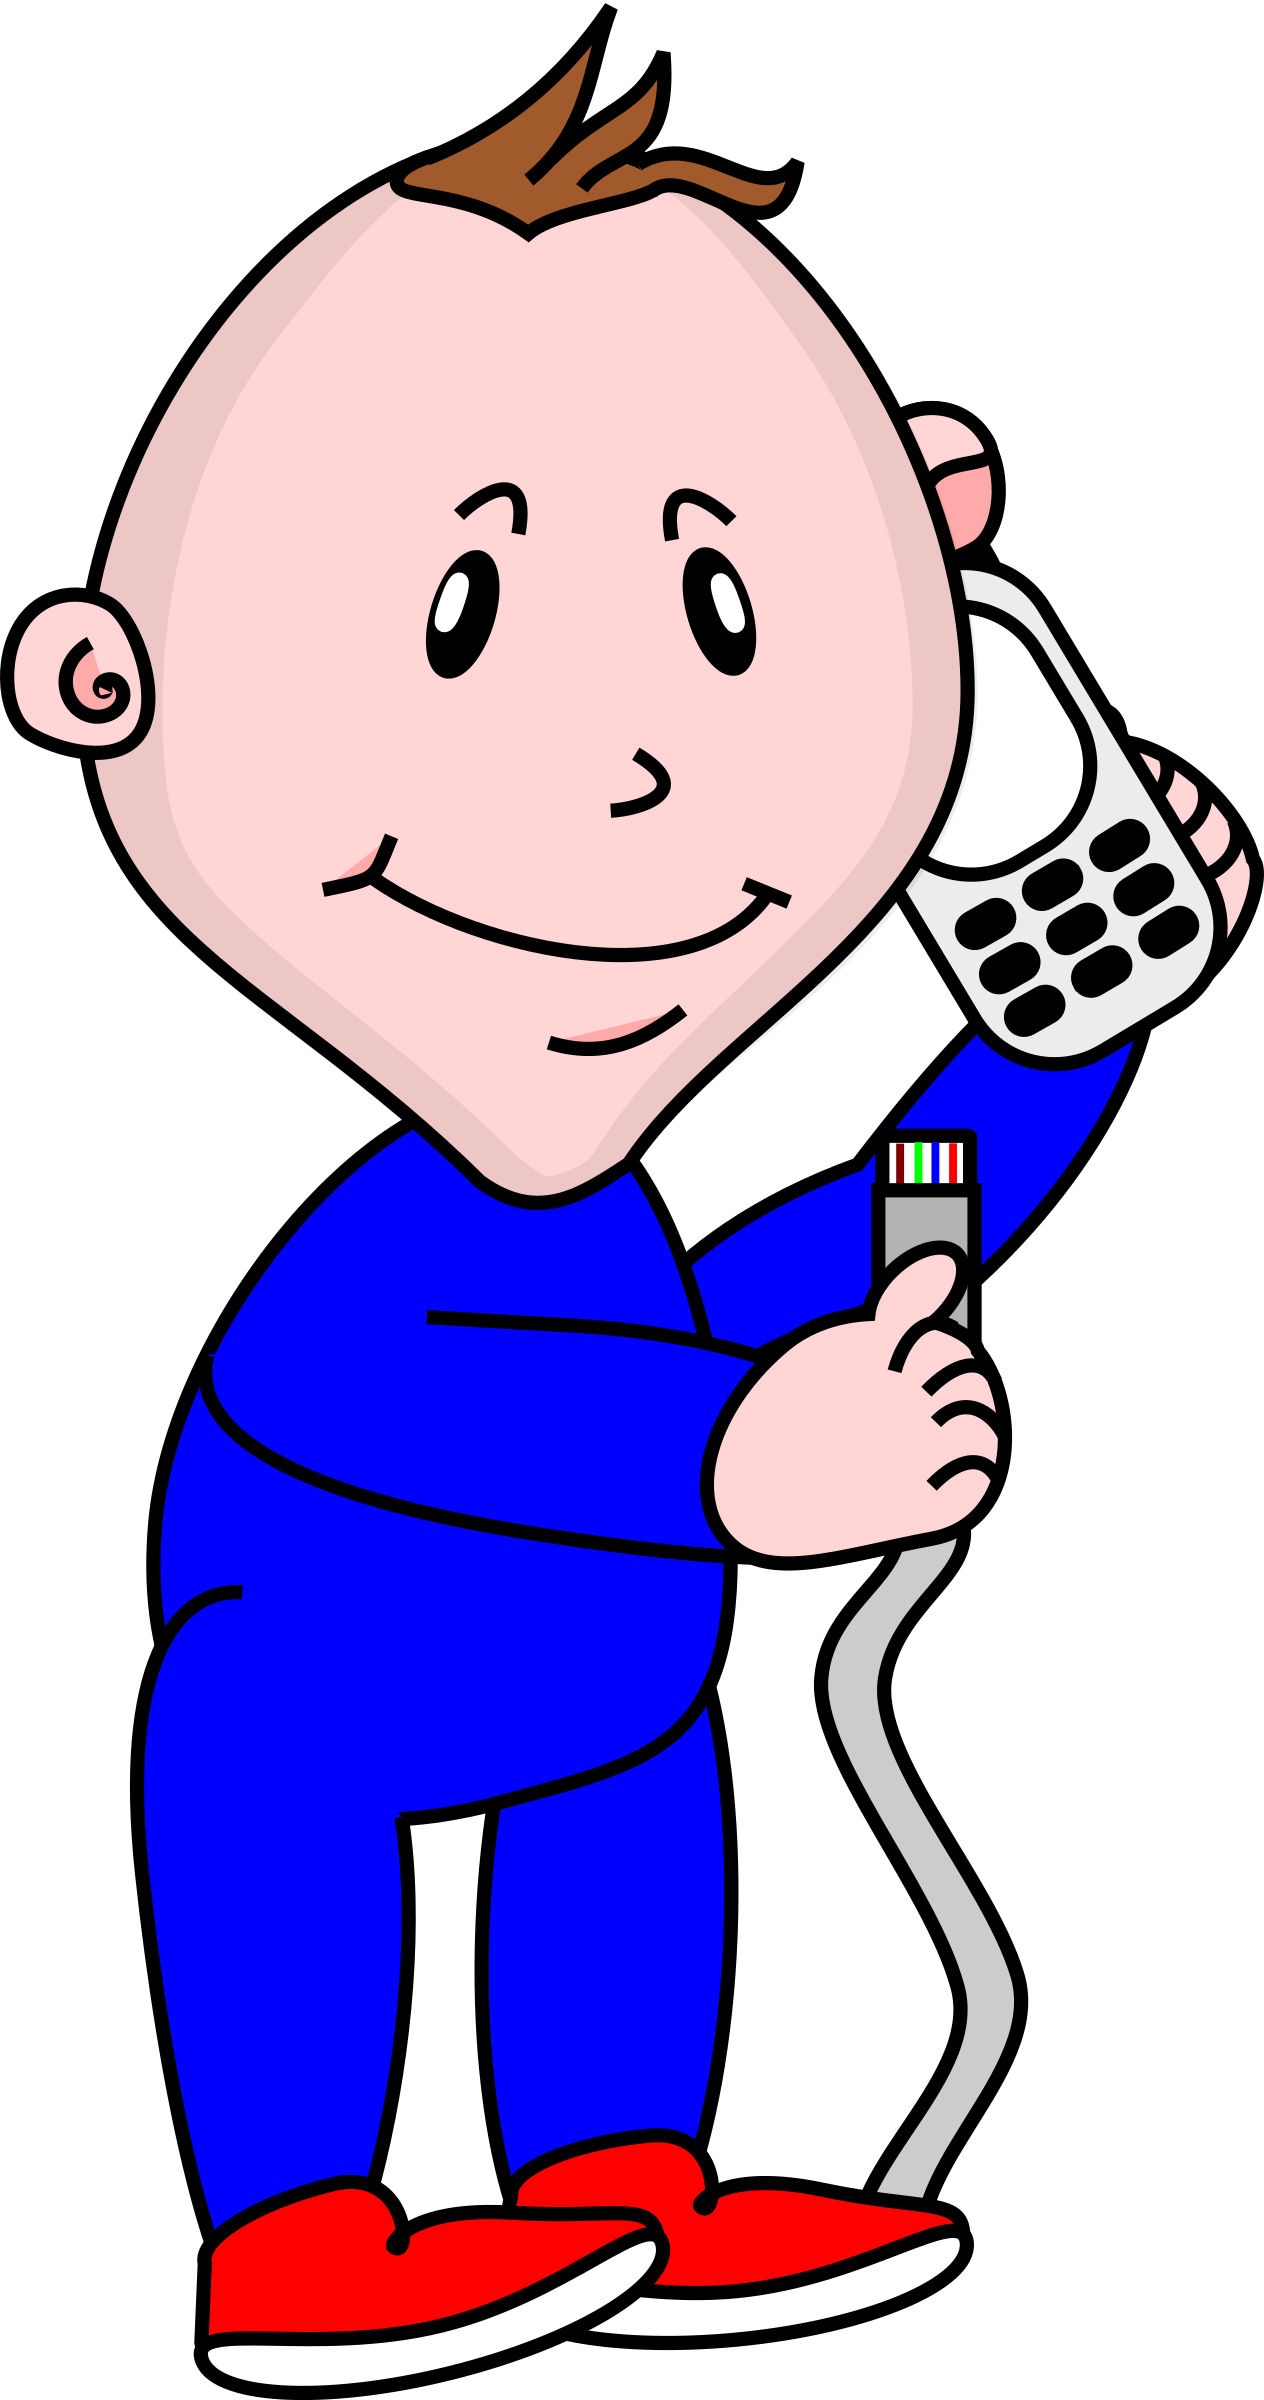 network clipart blue person